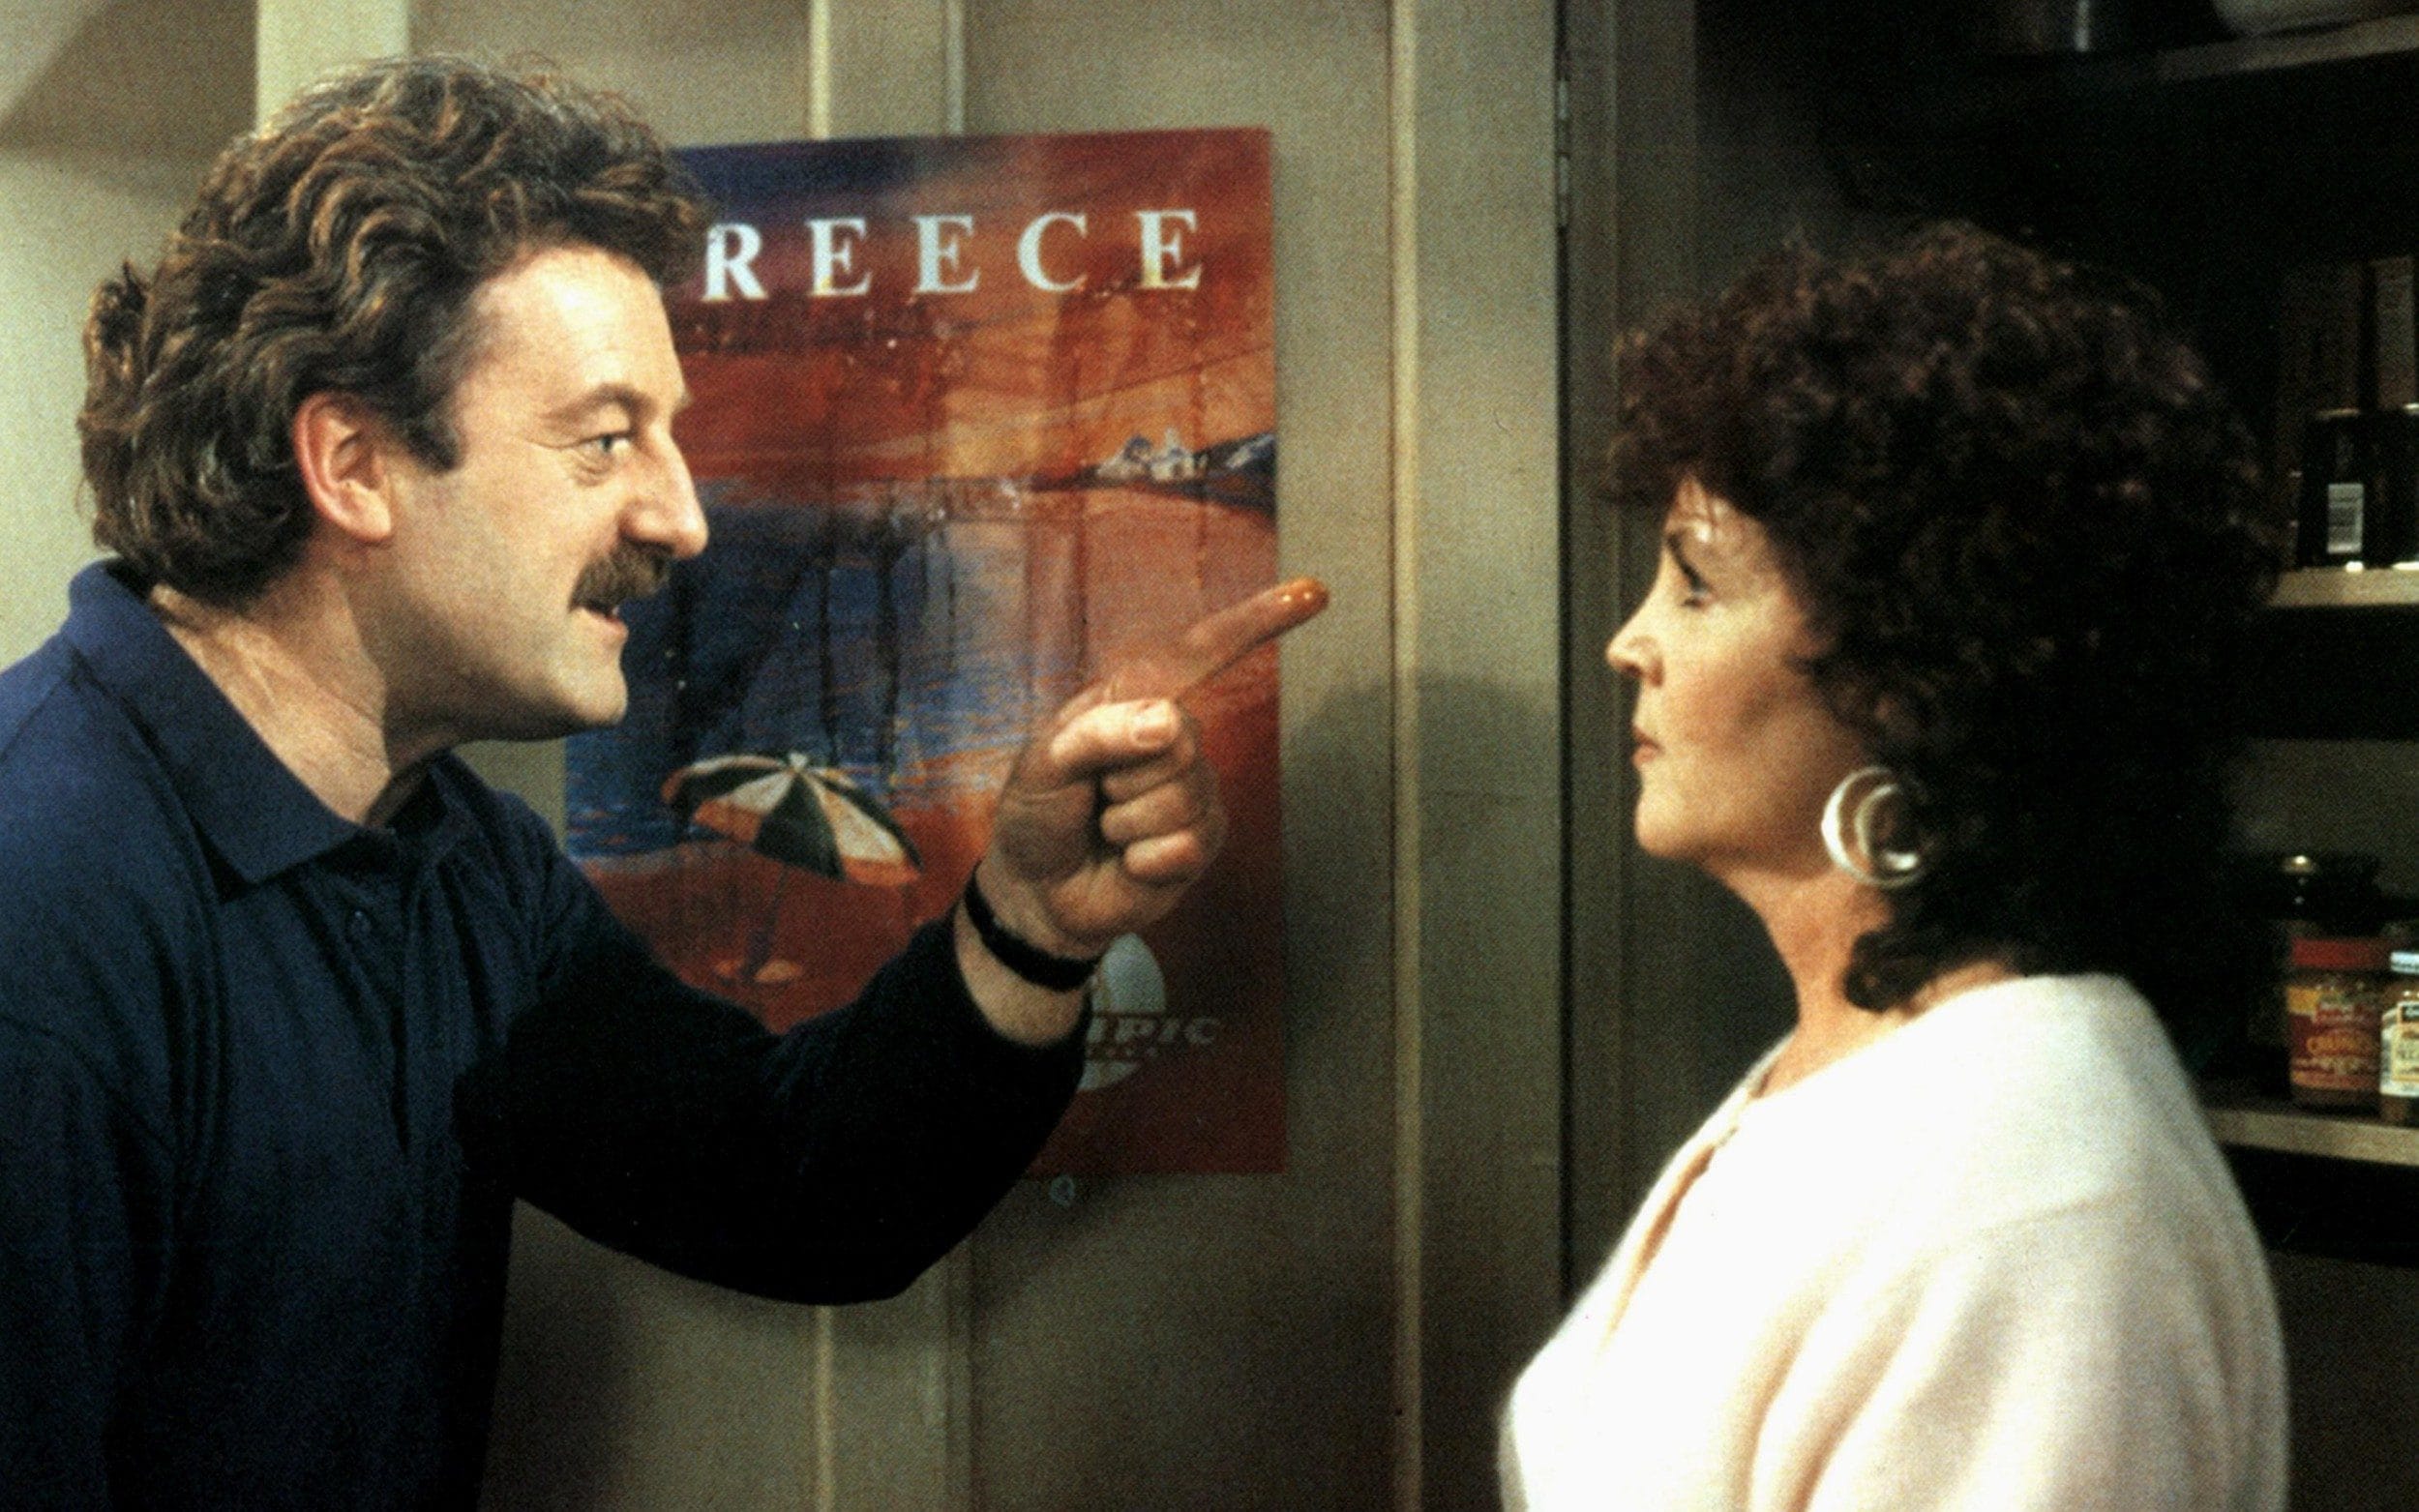 bernard hill’s five greatest roles: from titanic to boys from the blackstuff